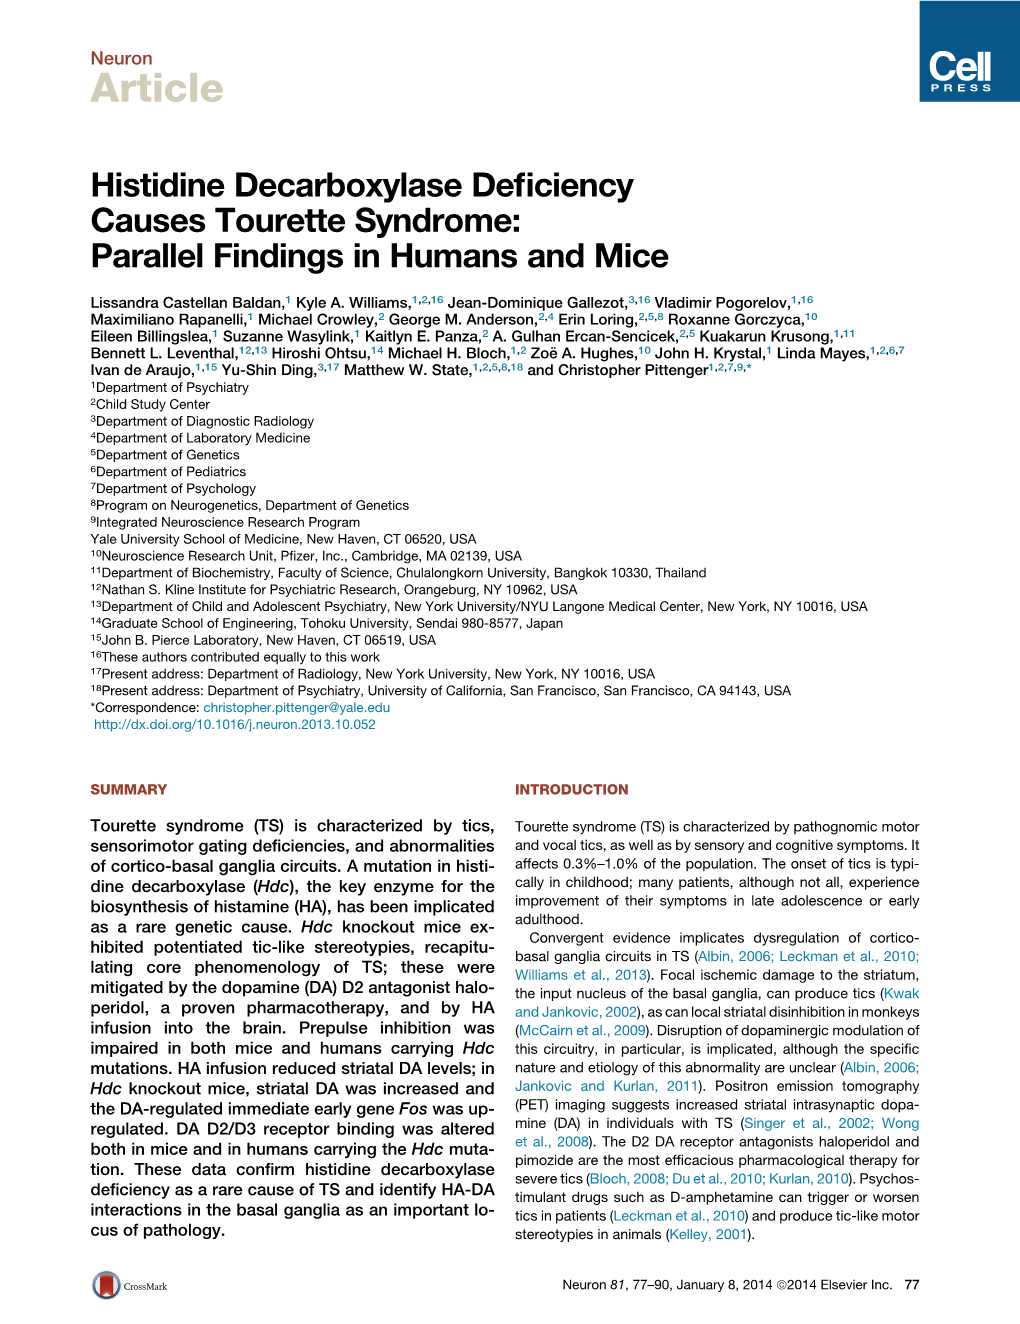 Histidine Decarboxylase Deficiency Causes Tourette Syndrome